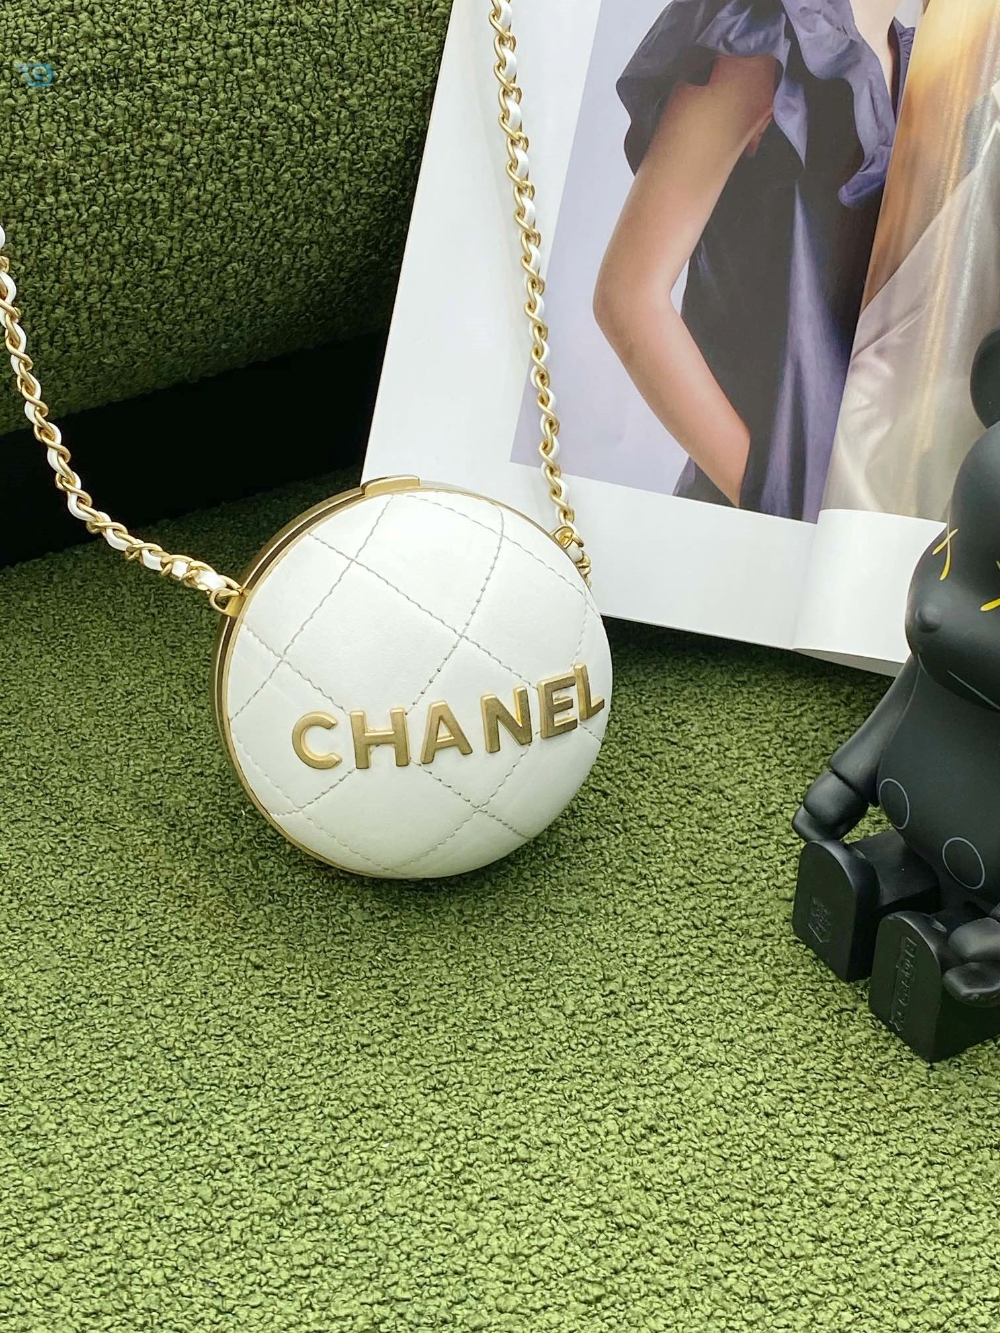 Chanel Ball Bag White And Gold Chain Bag For Women 8Cm3.15In